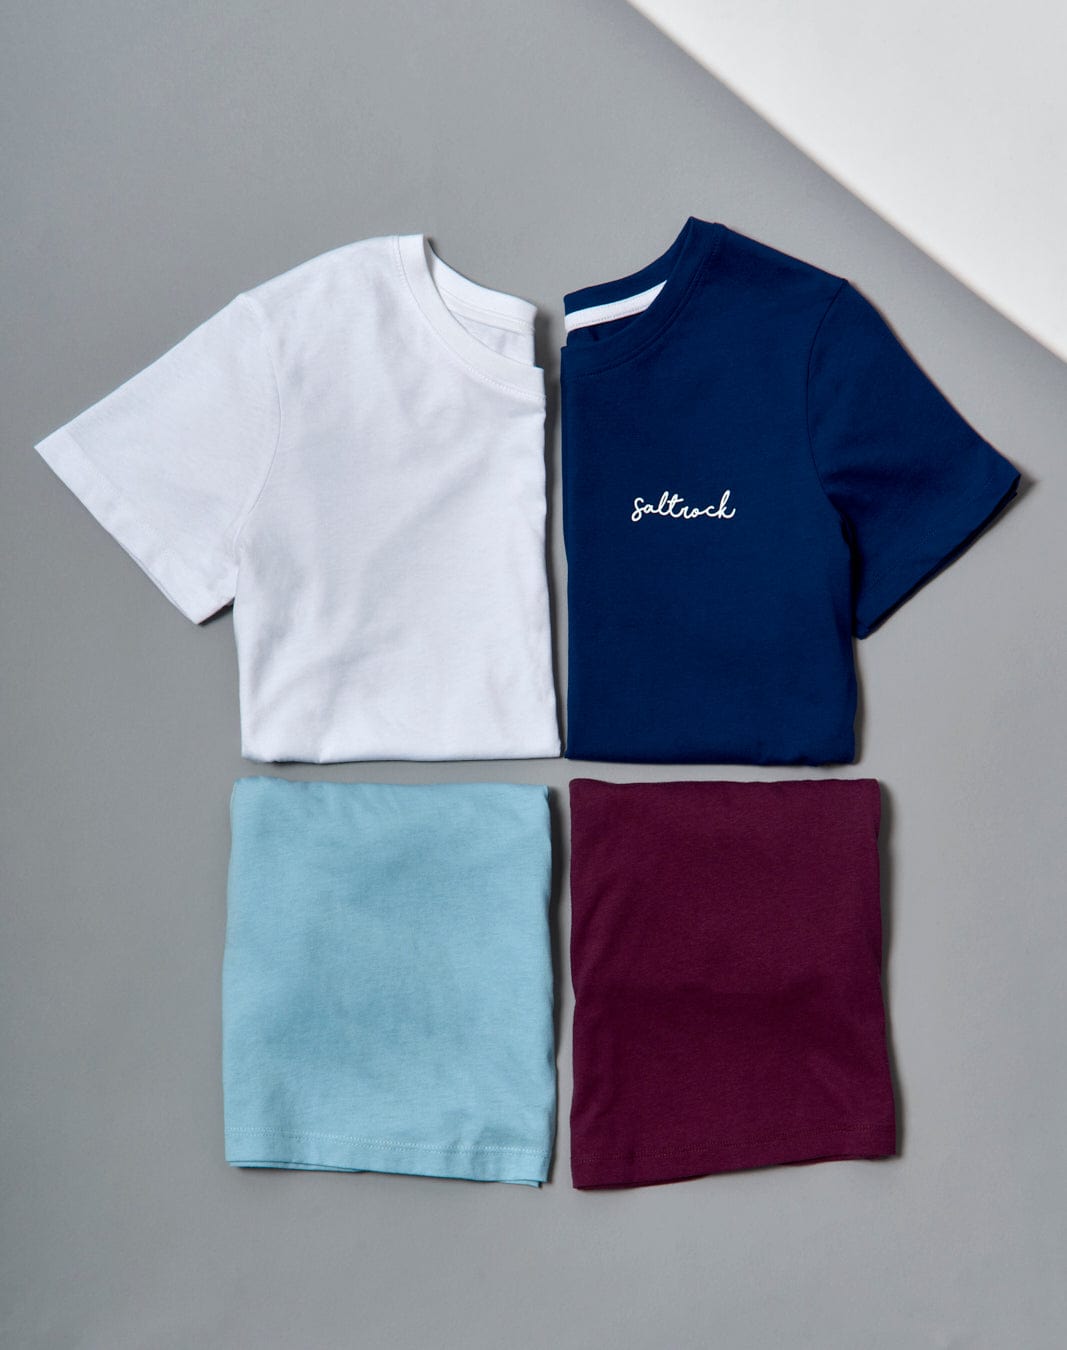 Three Velator - Womens Short Sleeve T-Shirts in Light Blue from the Saltrock range, featuring the word 'hello' on them. These staples are a must-have in every Saltrock wardrobe.